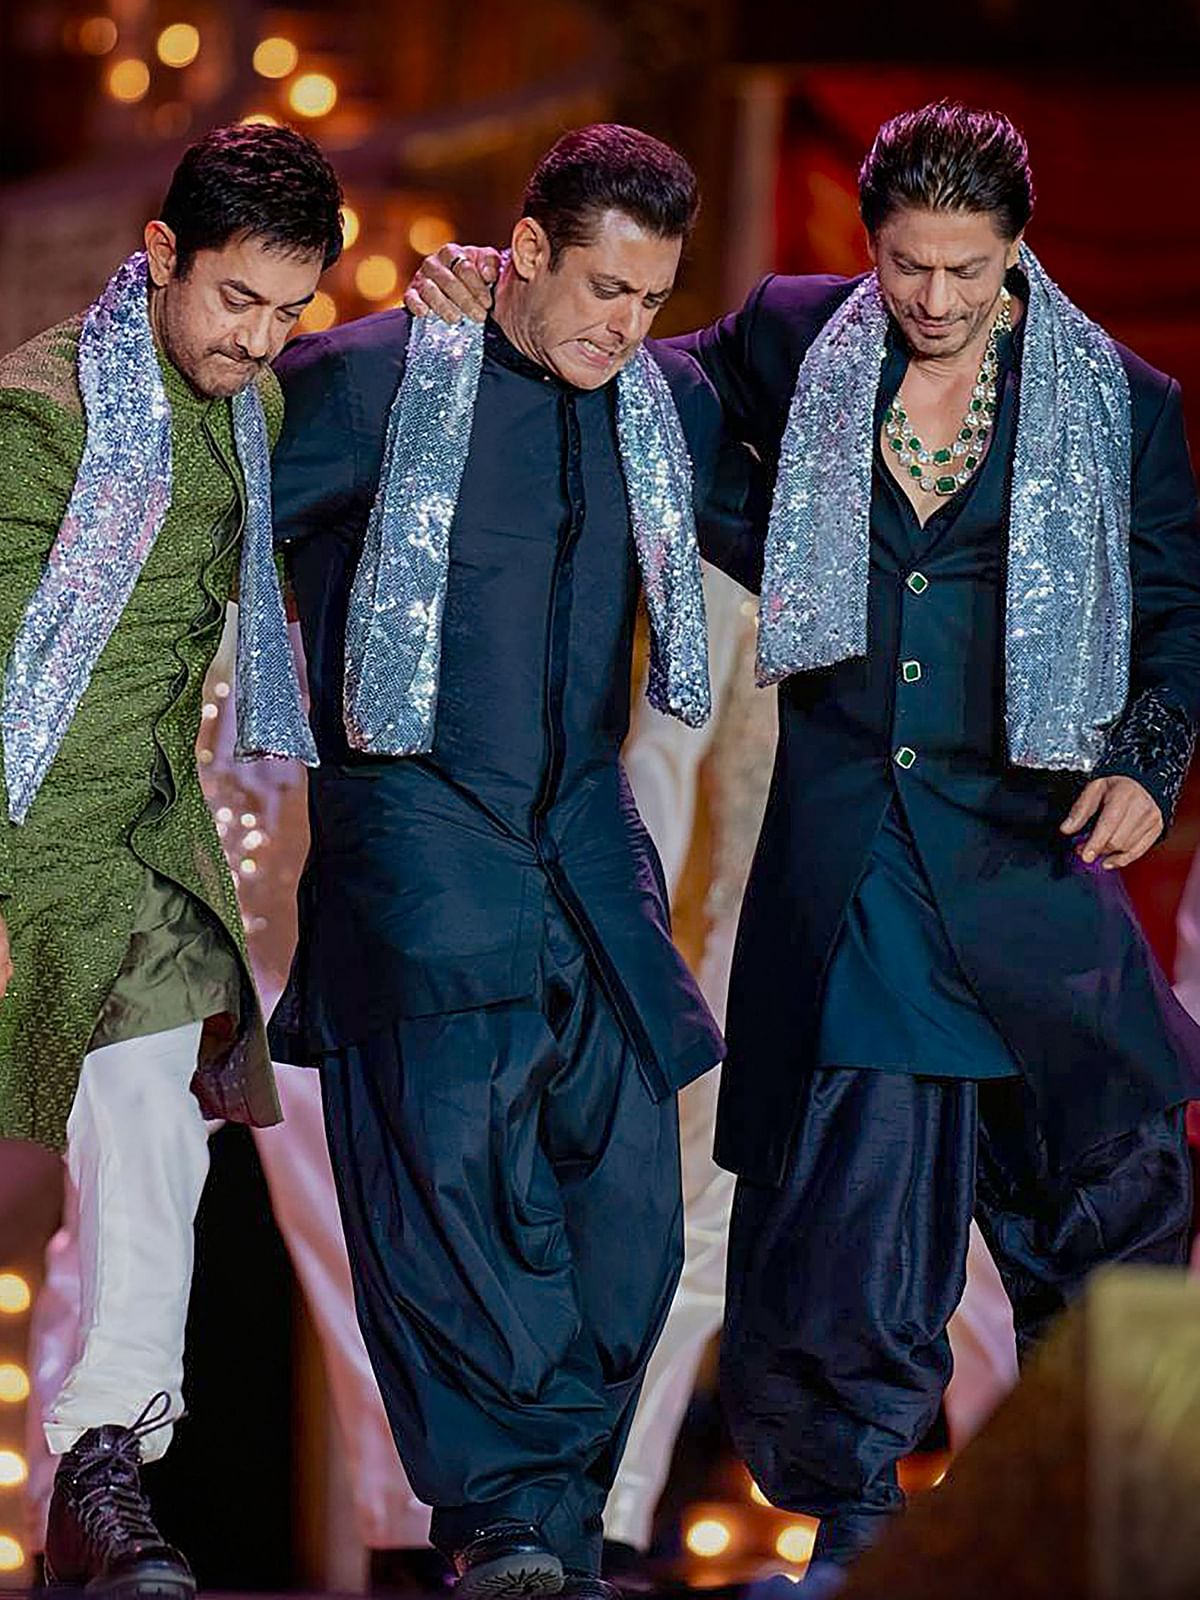 The Khan trio also showed off their bromance on-stage on the second day of the grand pre-wedding event of Anant and his fiancee Radhika Merchant.